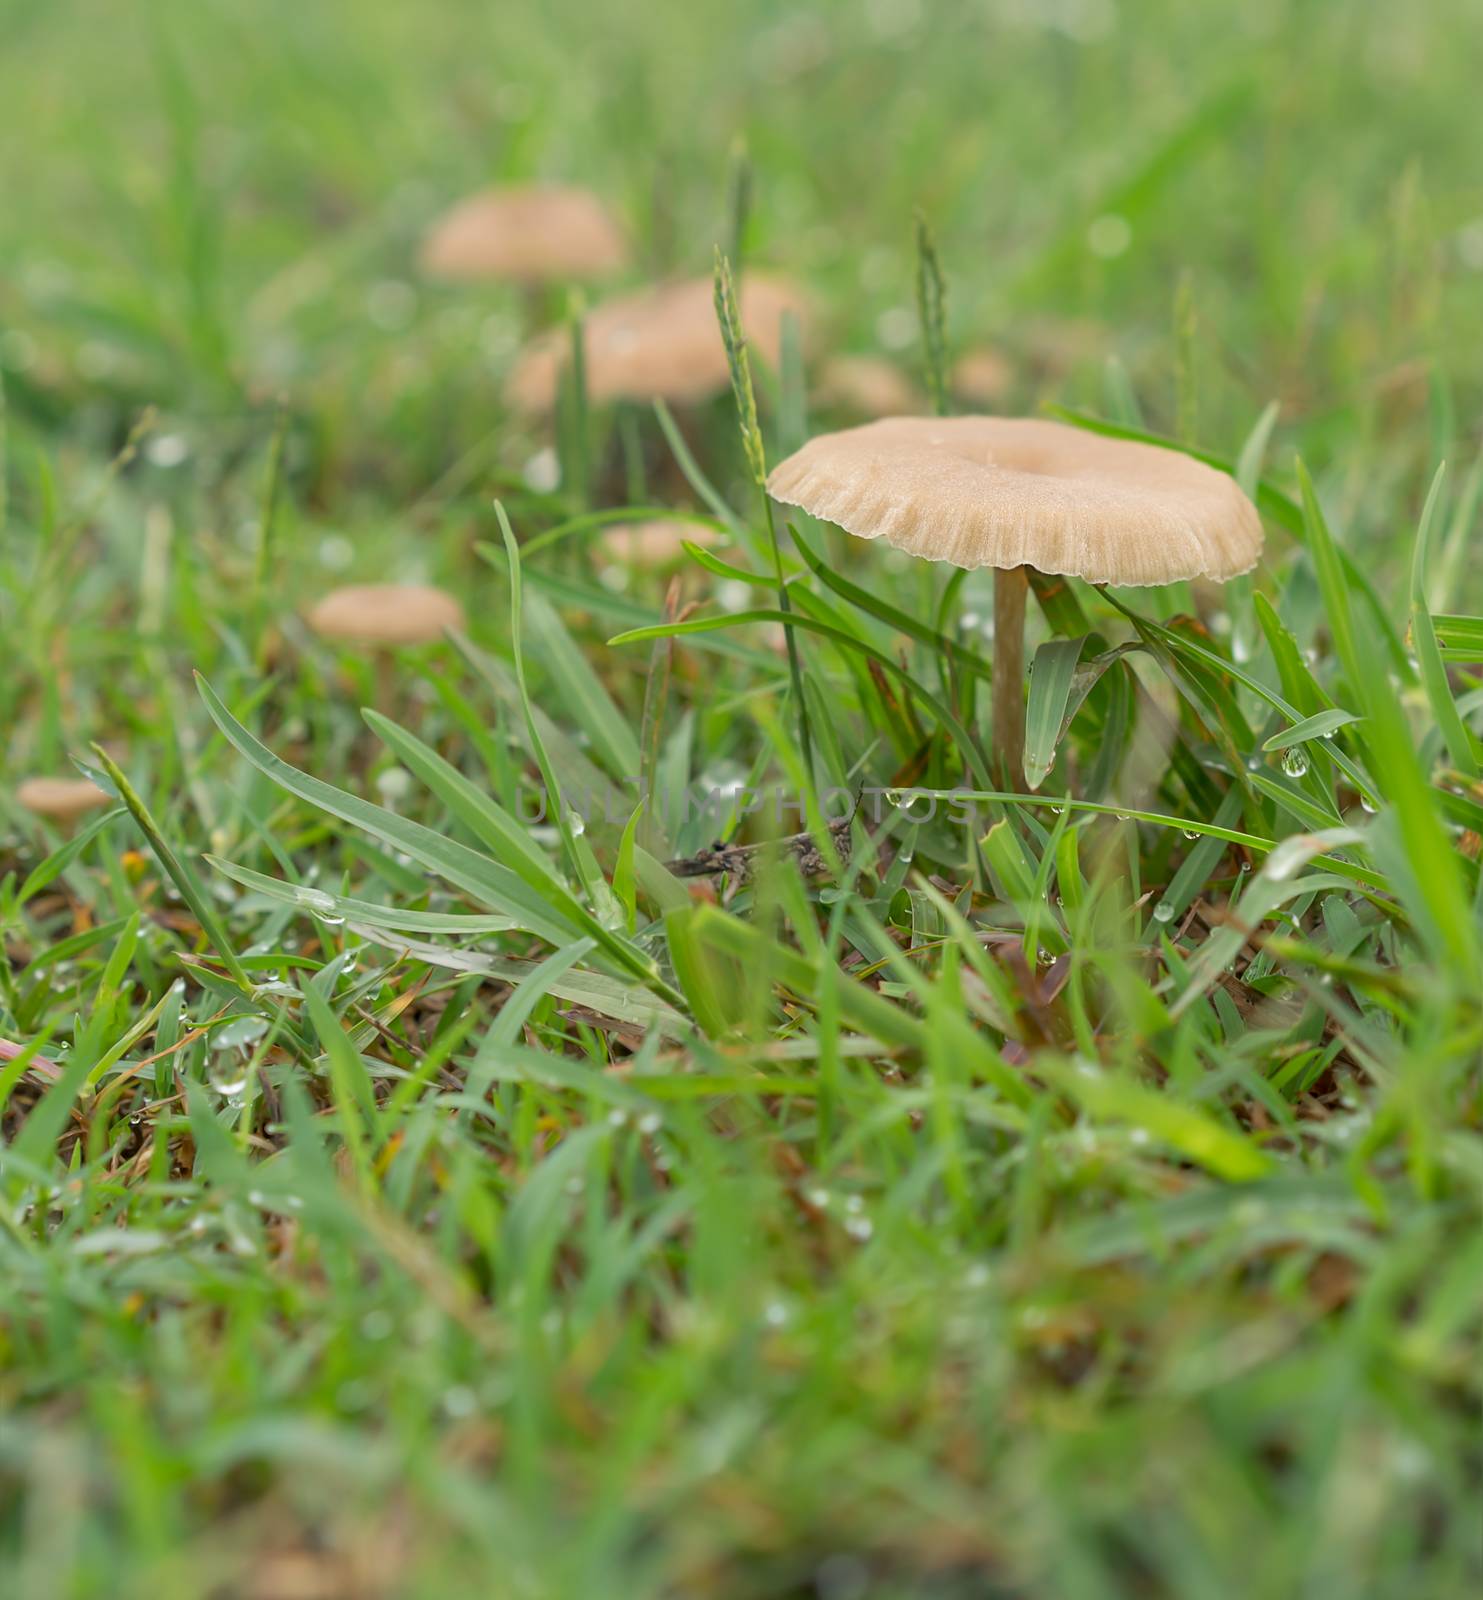 Tiny living mushrooms and raindrops in wet green grass after rainy weather